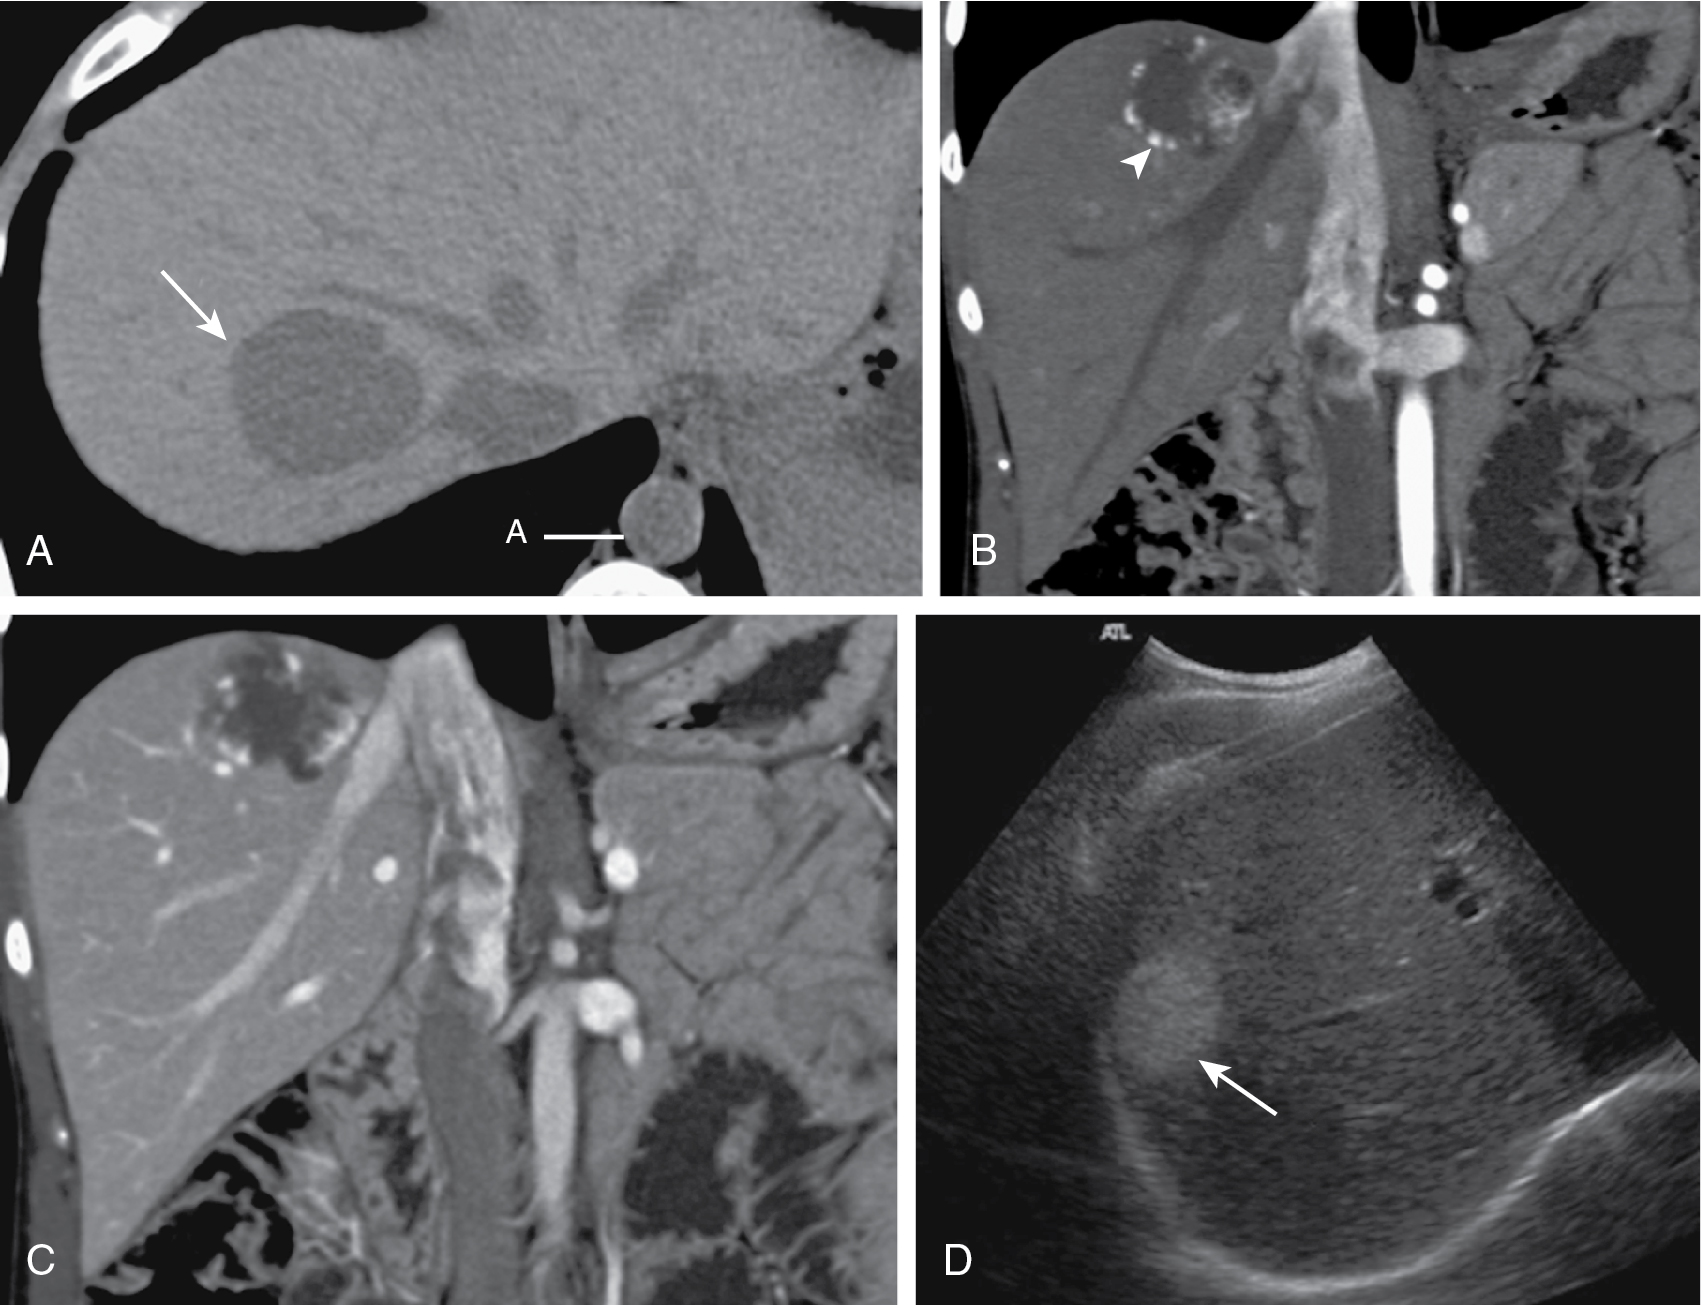 Fig. 17.9, Typical cavernous hemangioma. A, Axial precontrast computed tomographic image shows a 4-cm, hypoattenuating lesion ( arrow ) in the right lobe of the liver. Note the equal attenuation of the lesion with both aorta ( A ) and intrahepatic vessels. B and C, Coronally reformatted images of the same patient demonstrate nodular, peripheral, discontinuous enhancement ( arrowhead, B) on both (B) hepatic arterial phase and (C) portal venous phase, which is comparable to vessels on all vascular phases. D, Ultrasound image in a different patient shows a homogeneous, well-defined, hyperechoic lesion ( arrow ) of the right hepatic lobe.